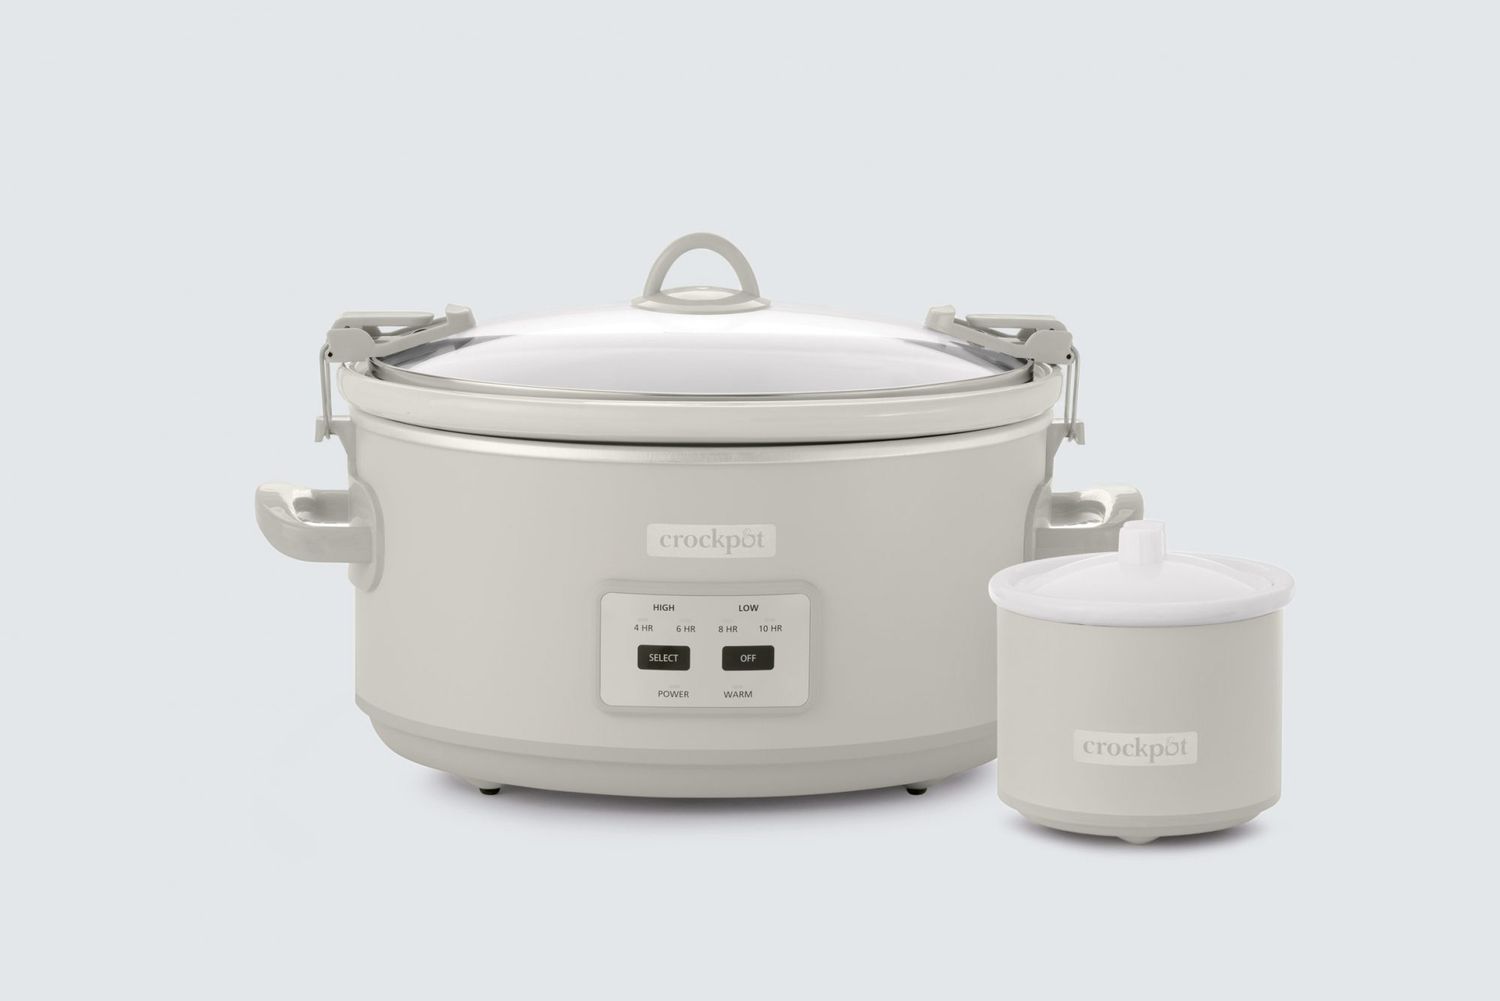 crockpot 7 quart cook and carry slow cooker